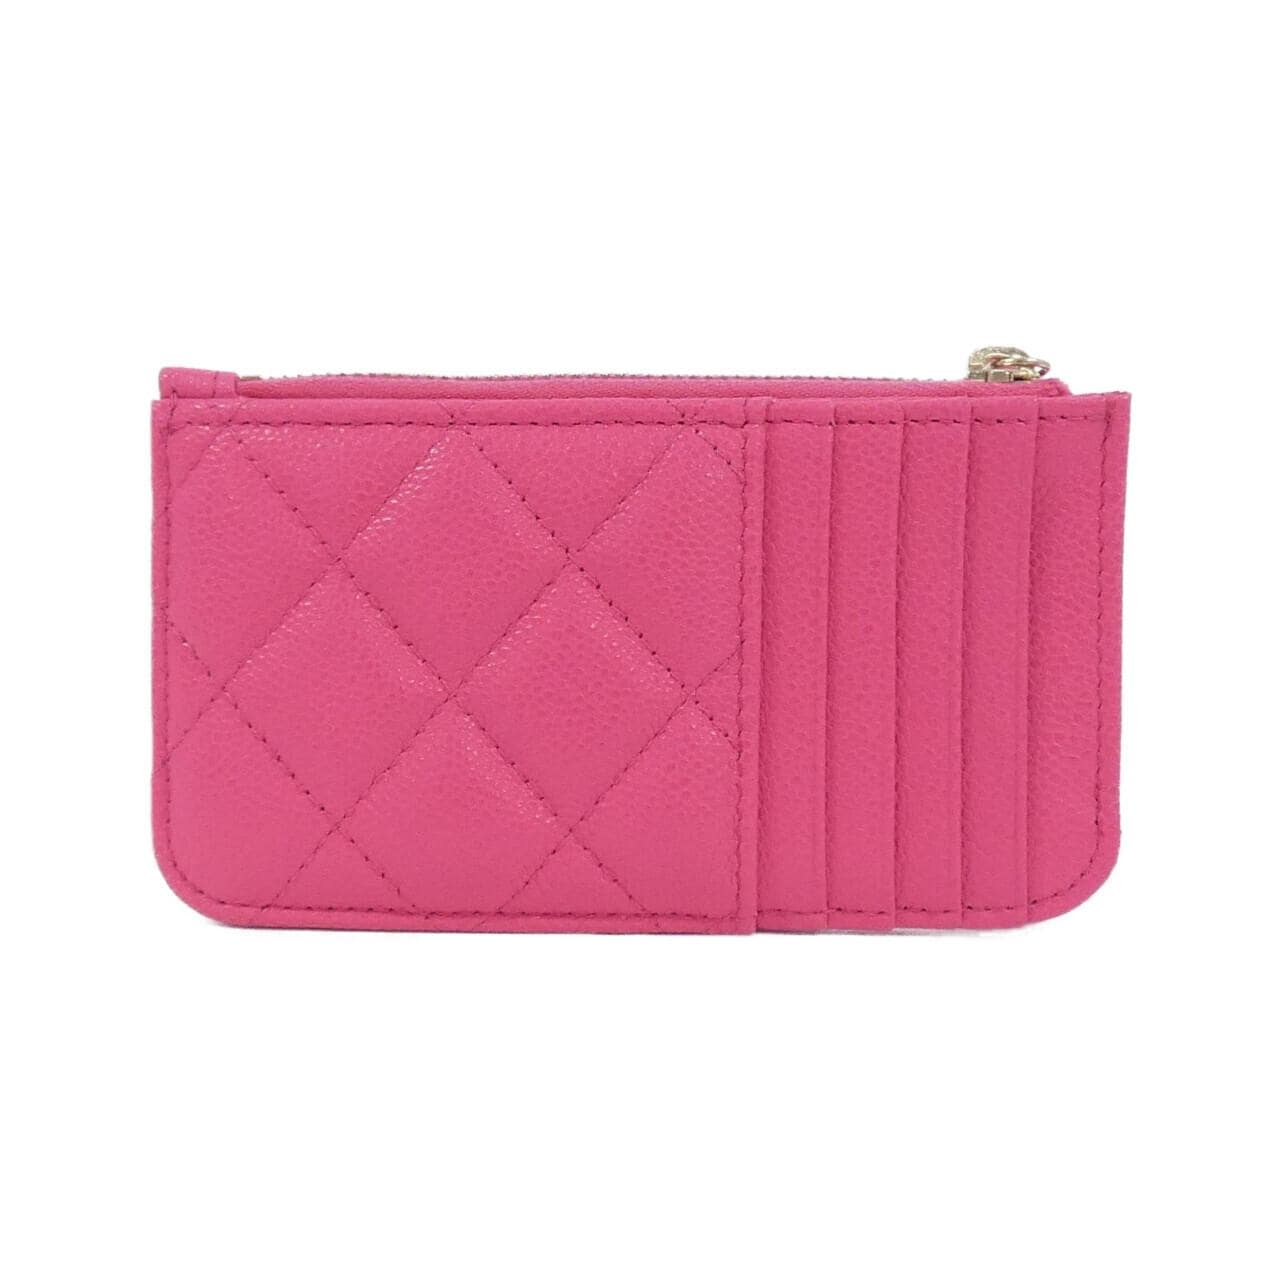 [Unused items] CHANEL Timeless Classic Line AP2570 Card Case